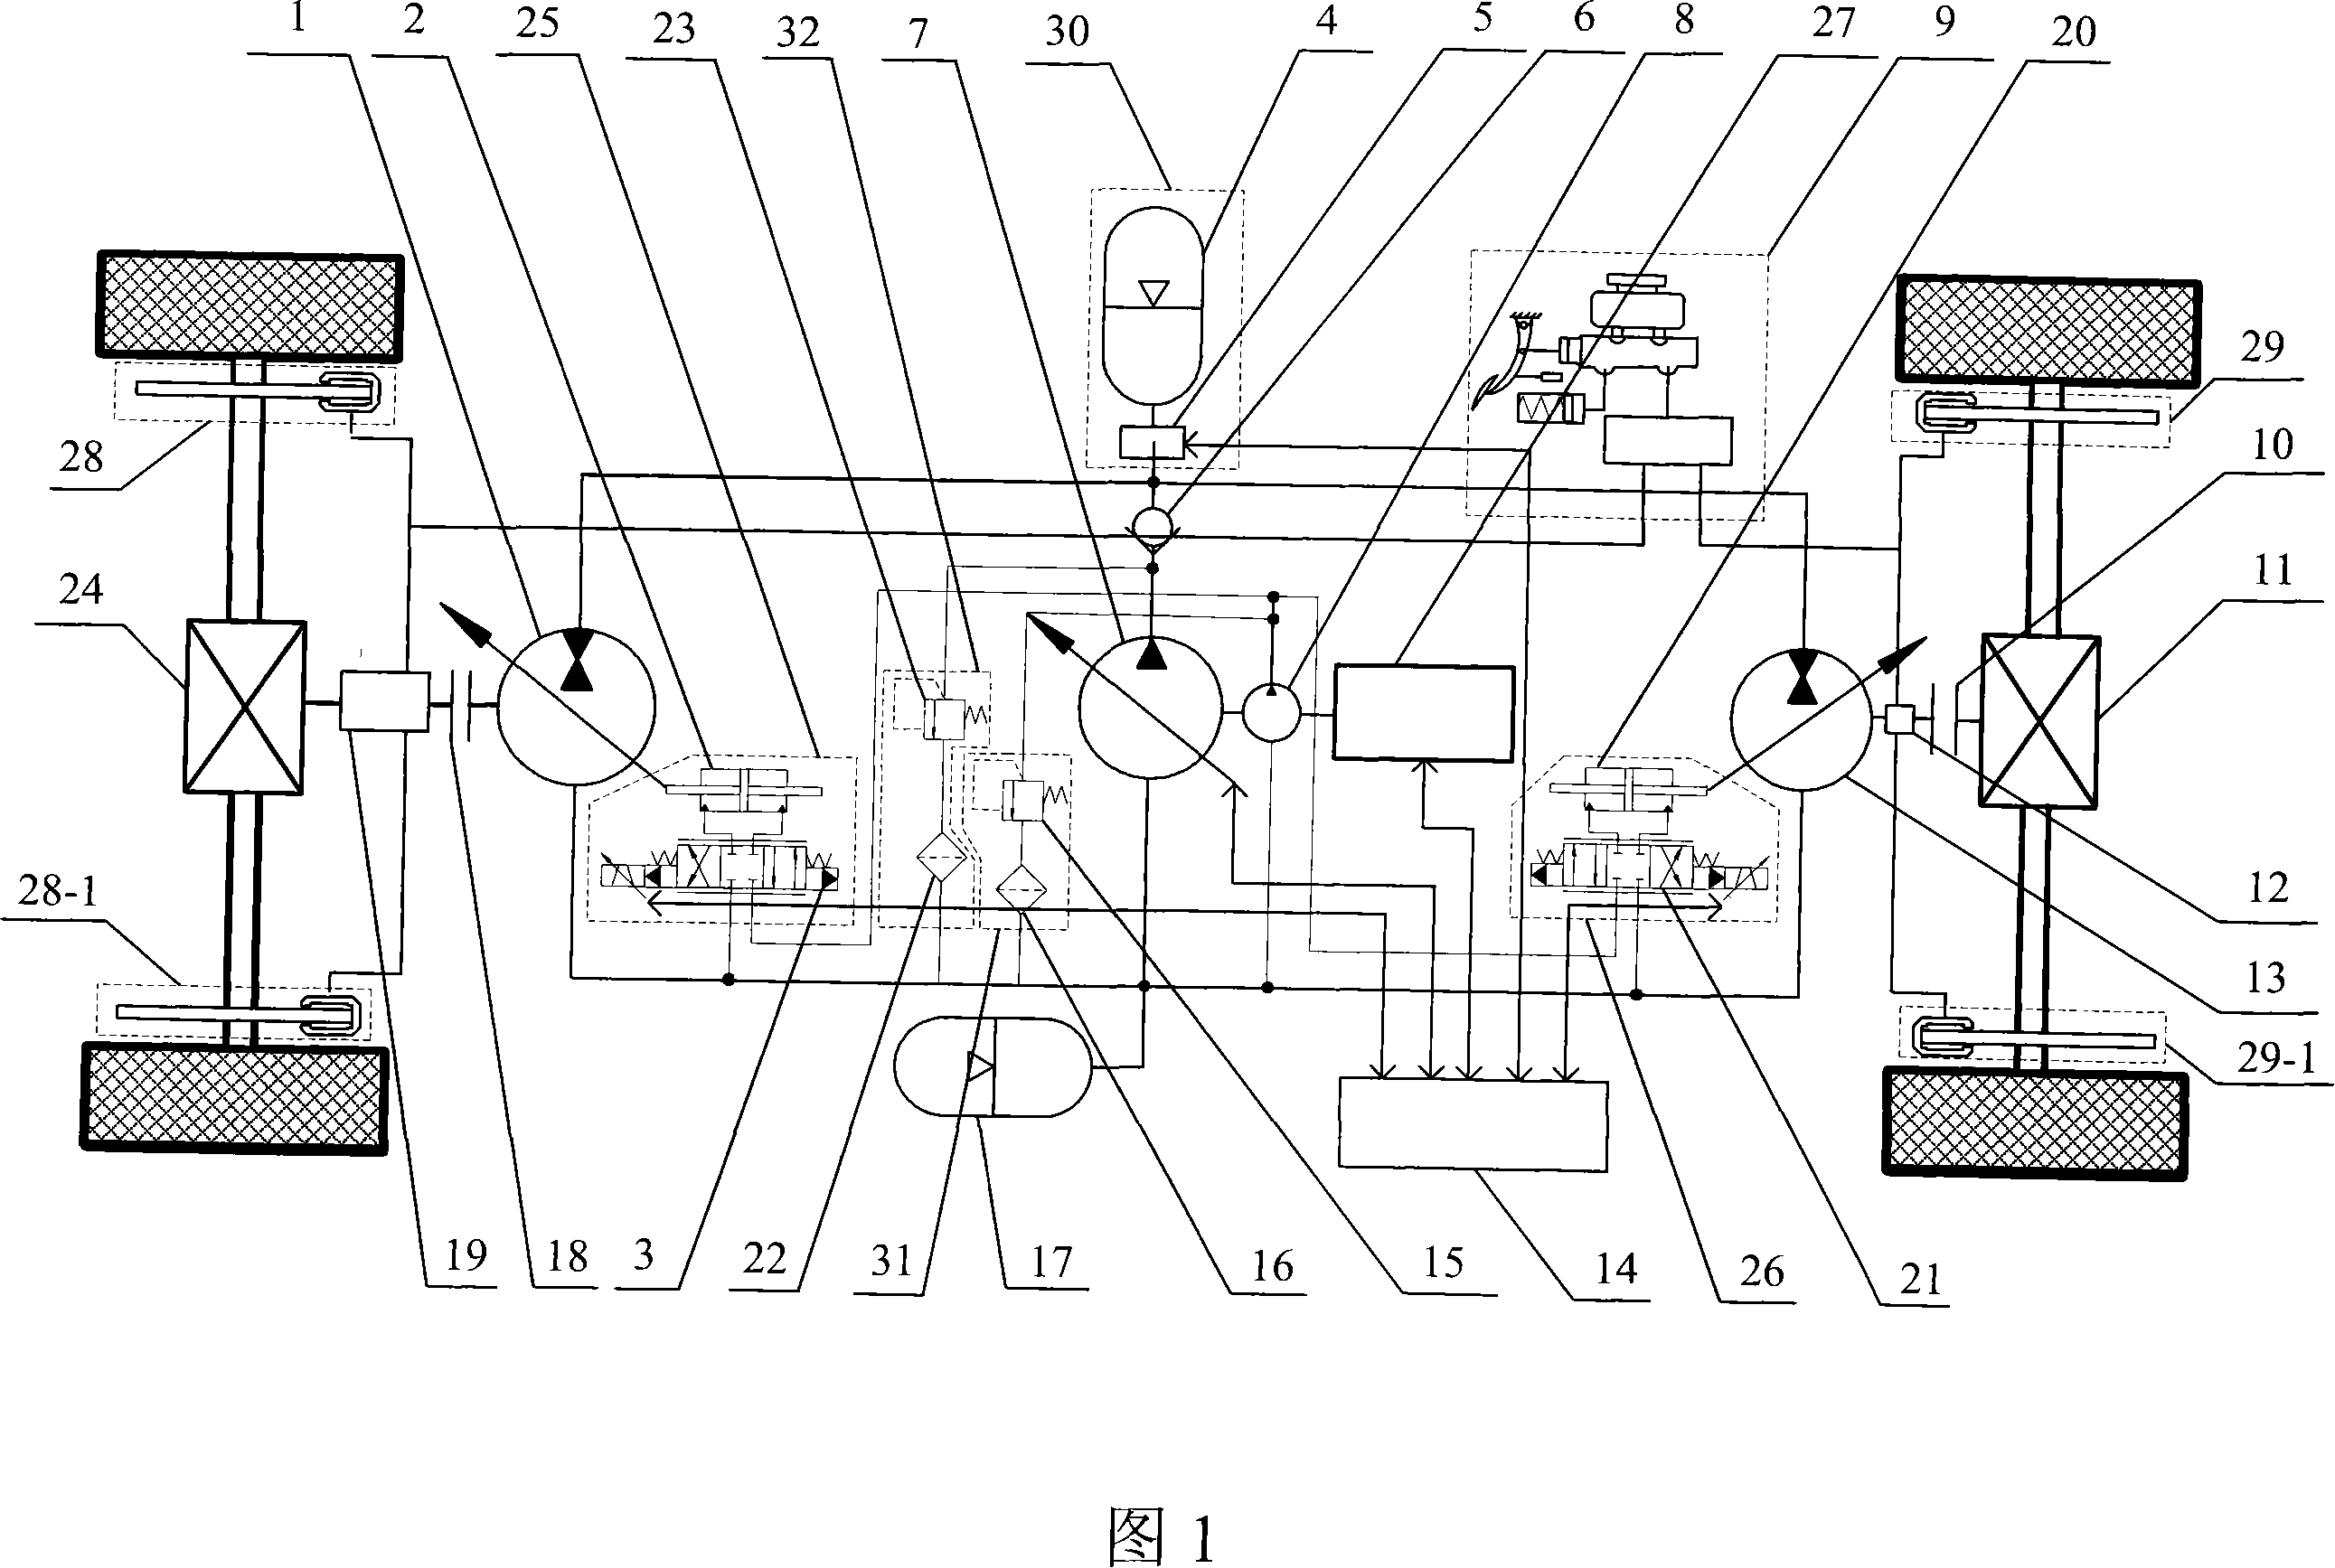 Transmission system of double-bridge liquid-driving mixed power automobile